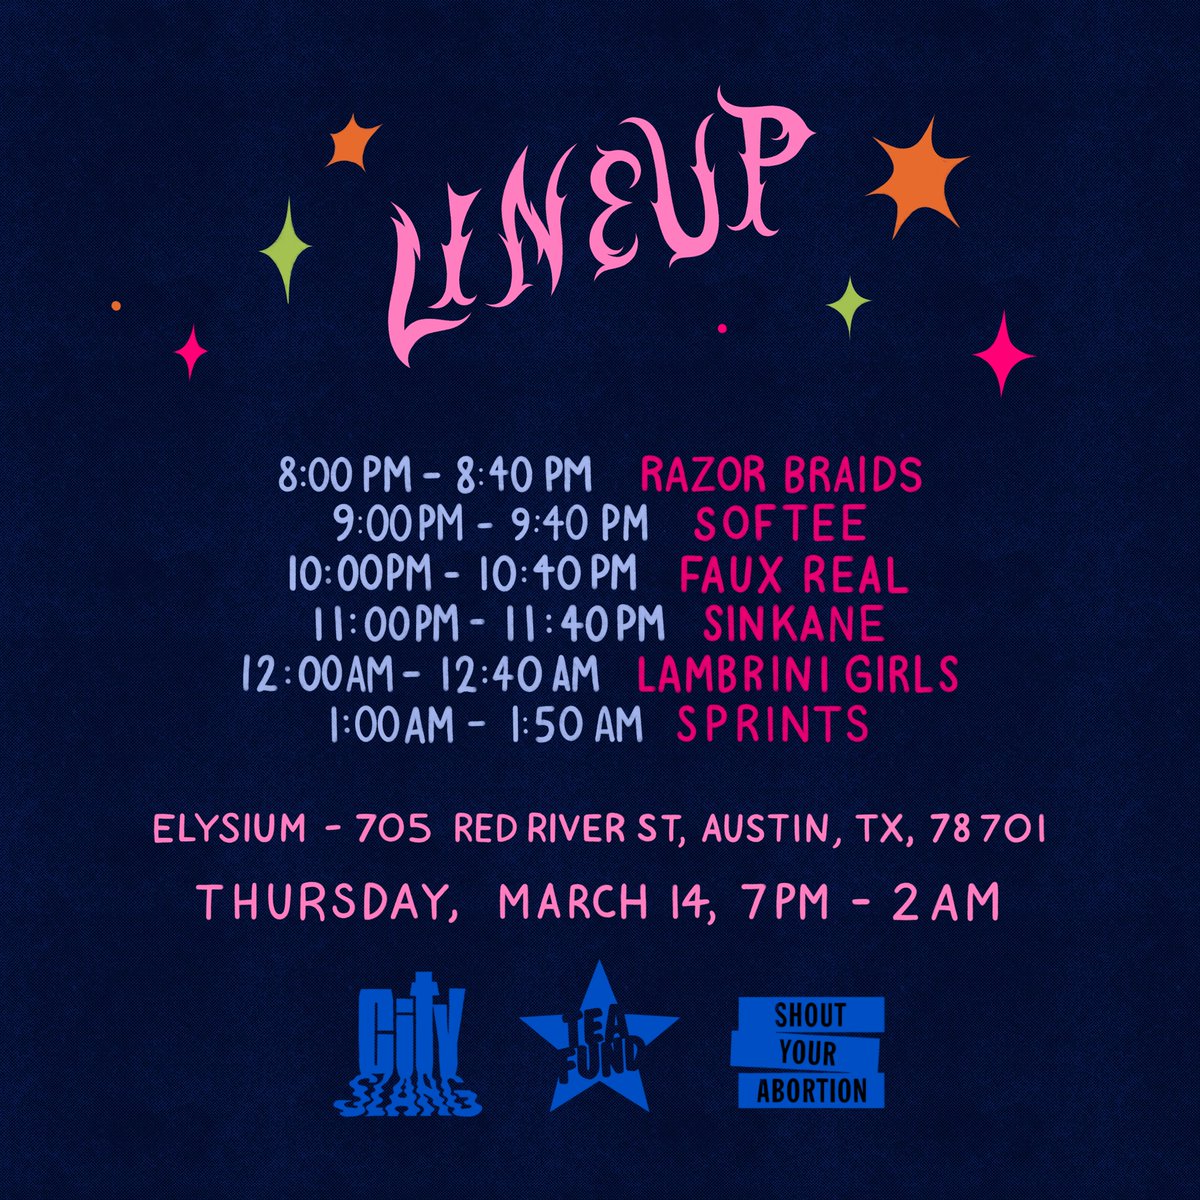 WE ARE HYPED 

This year’s City Slang Showcase at @sxsw is on Thursday, March 14th at Elysium from 7pm - late! 
BE THERE 🧨

@RazorBraids 
@Softeepopstar 
Faux Real
@Sinkane 
@Lambrini_Girls
@SPRINTSmusic

Proceeds go @TEAFund and  #shoutyourabortion
Artwork Jonah G. Piersanti